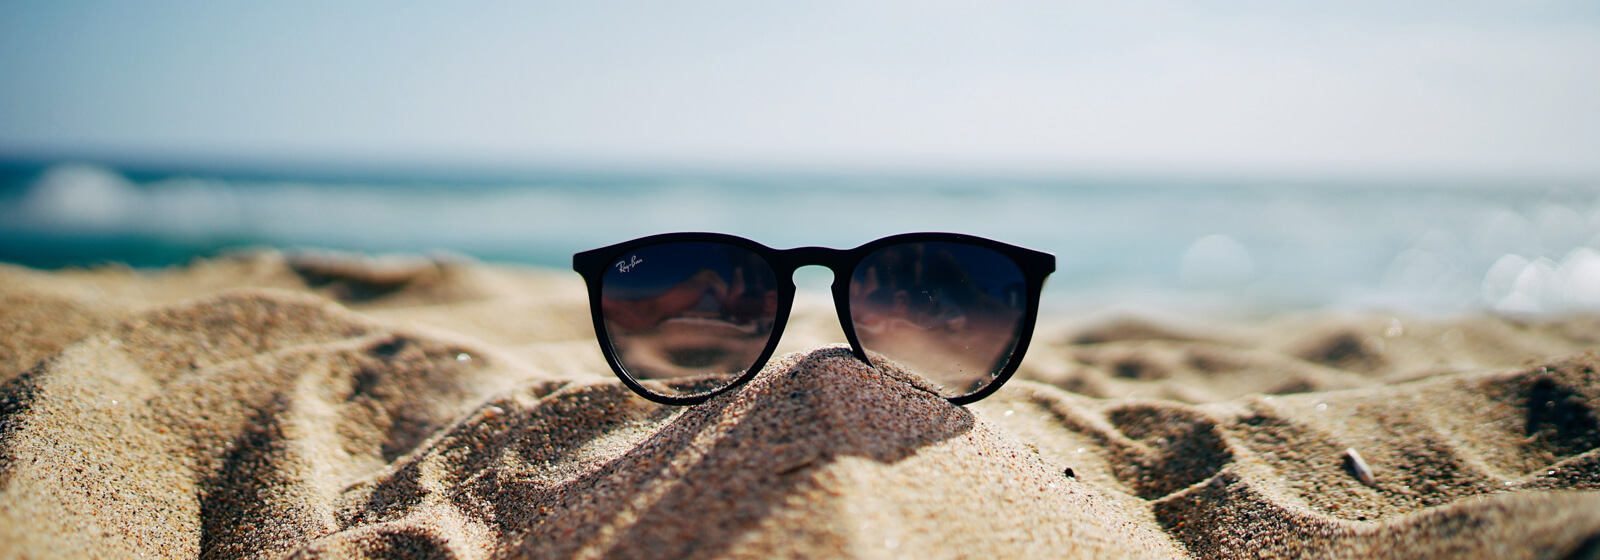 Sunglasses in the sand image slide